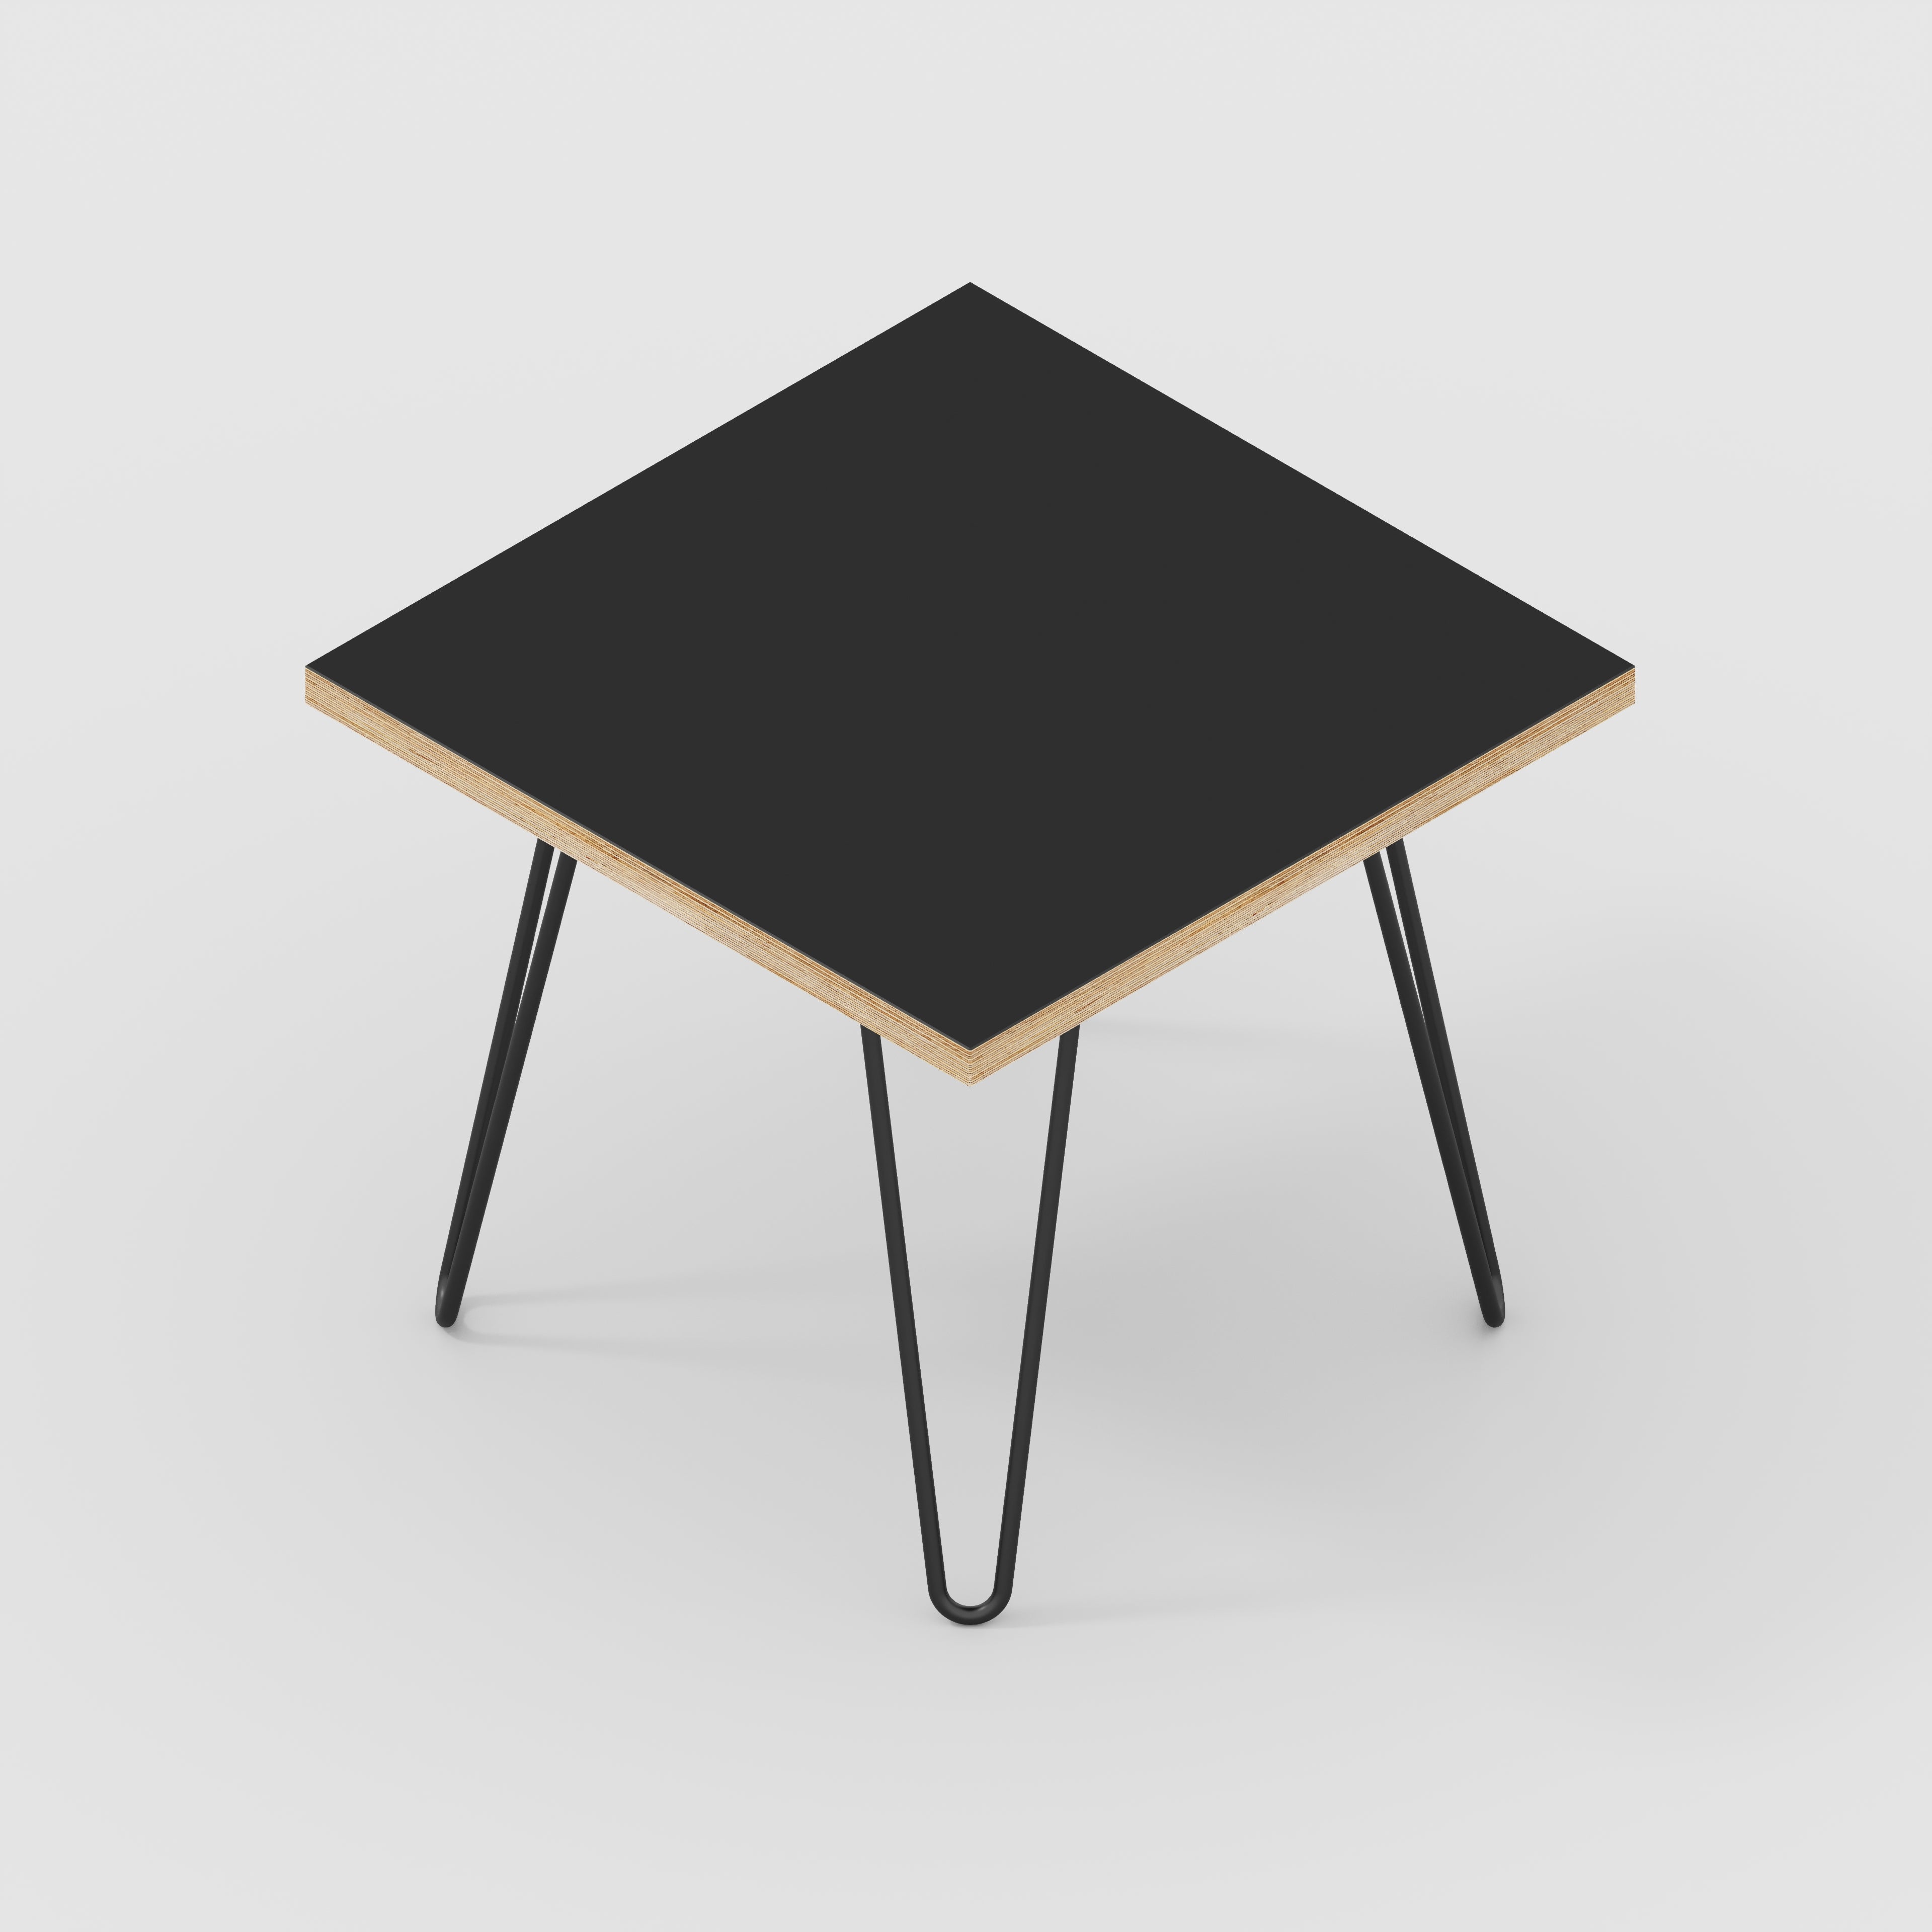 Side Table with Black Hairpin Legs - Formica Diamond Black - 500(w) x 500(d) x 425(h)